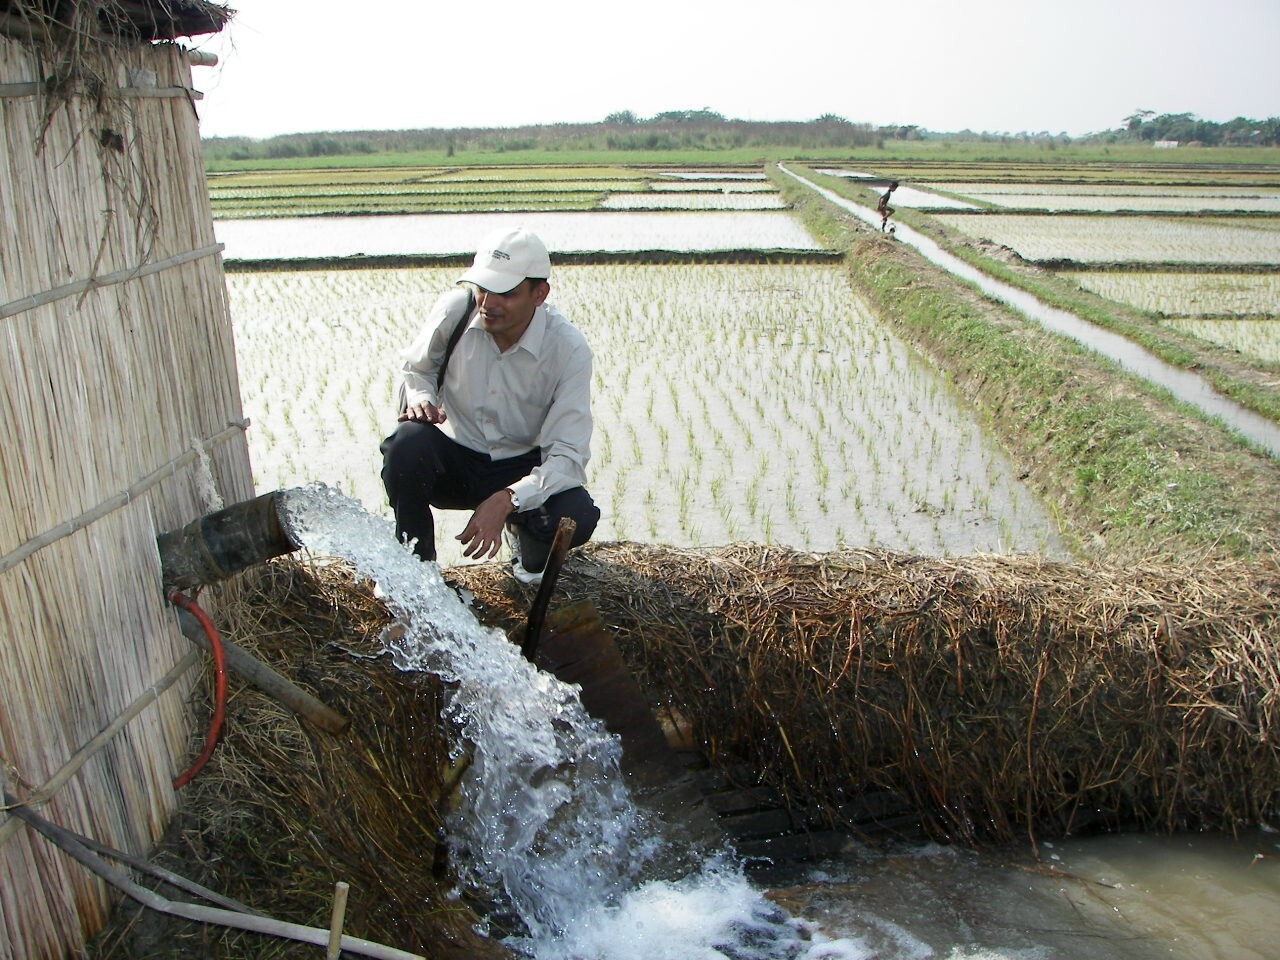 a bangladeshi farmer kneels next to a building built out reeds with a metal pipe coming out of it, which is gushing water into a man-made waterway beneath it